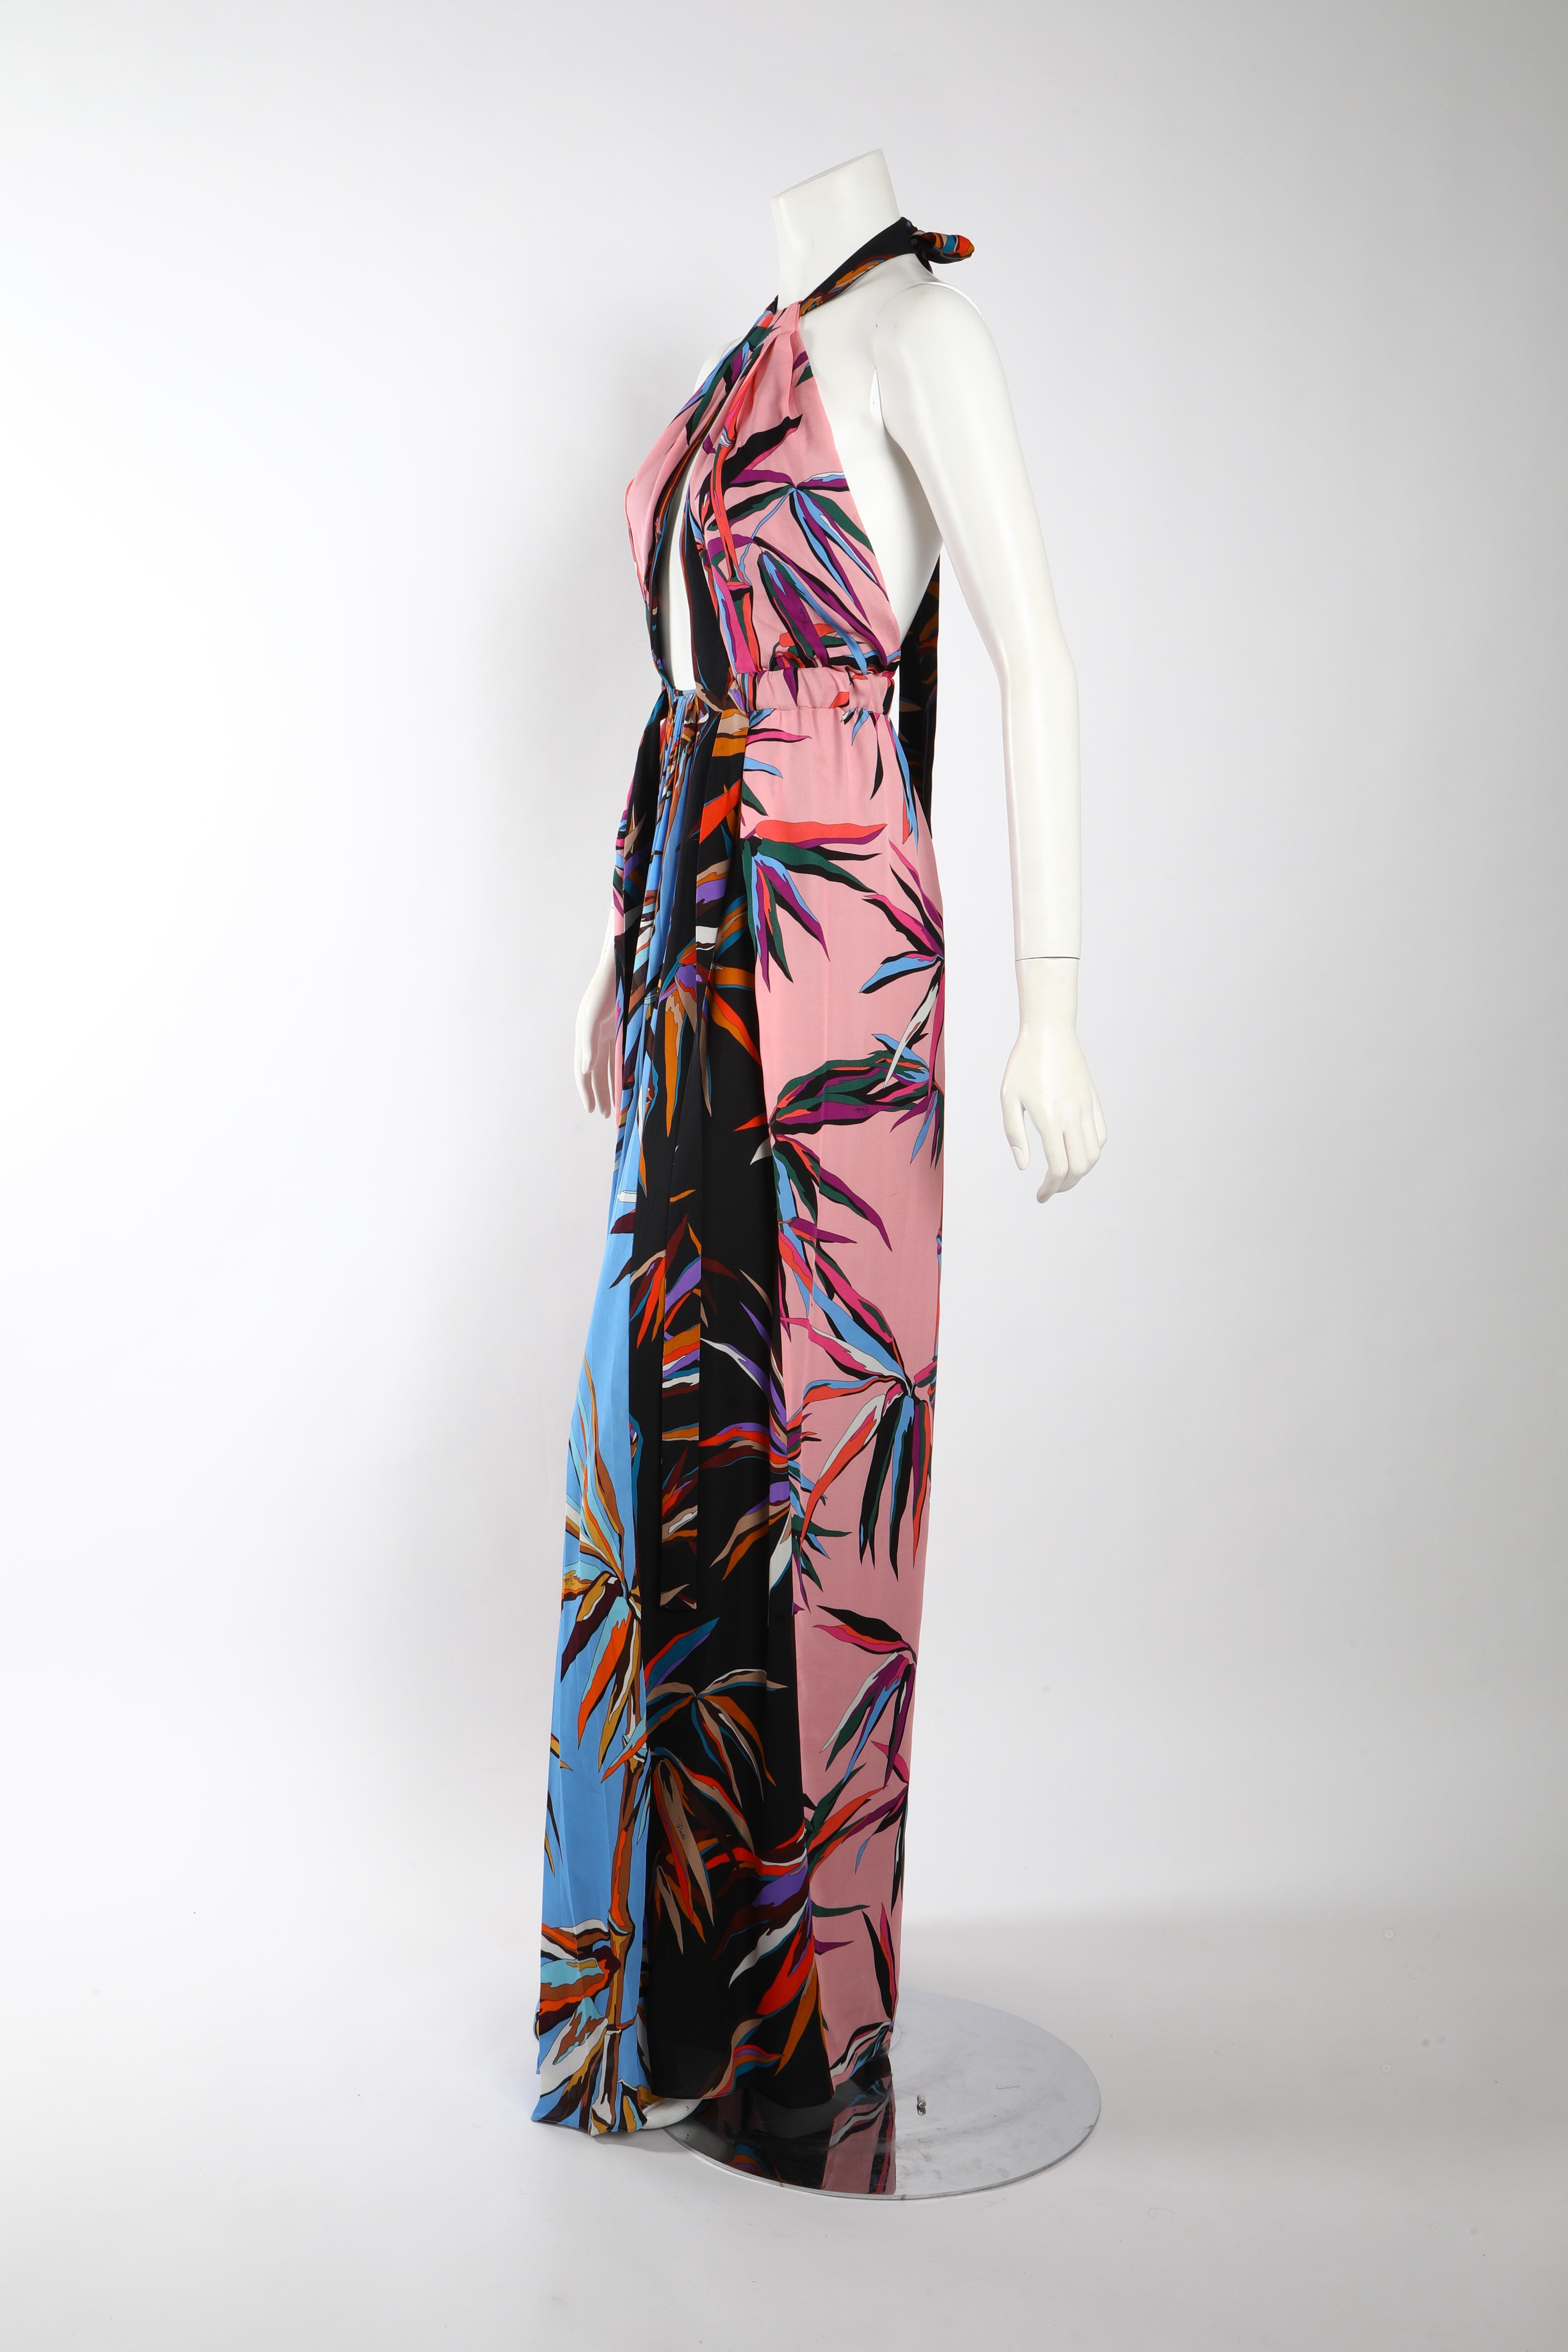 Printed floor length gown in tones of pastel pink, sky blue, and navy by Emilio Pucci. Draped silhouette with keyhole opening above the bust line and halter neck tie. Size US 2/ IT 38. 